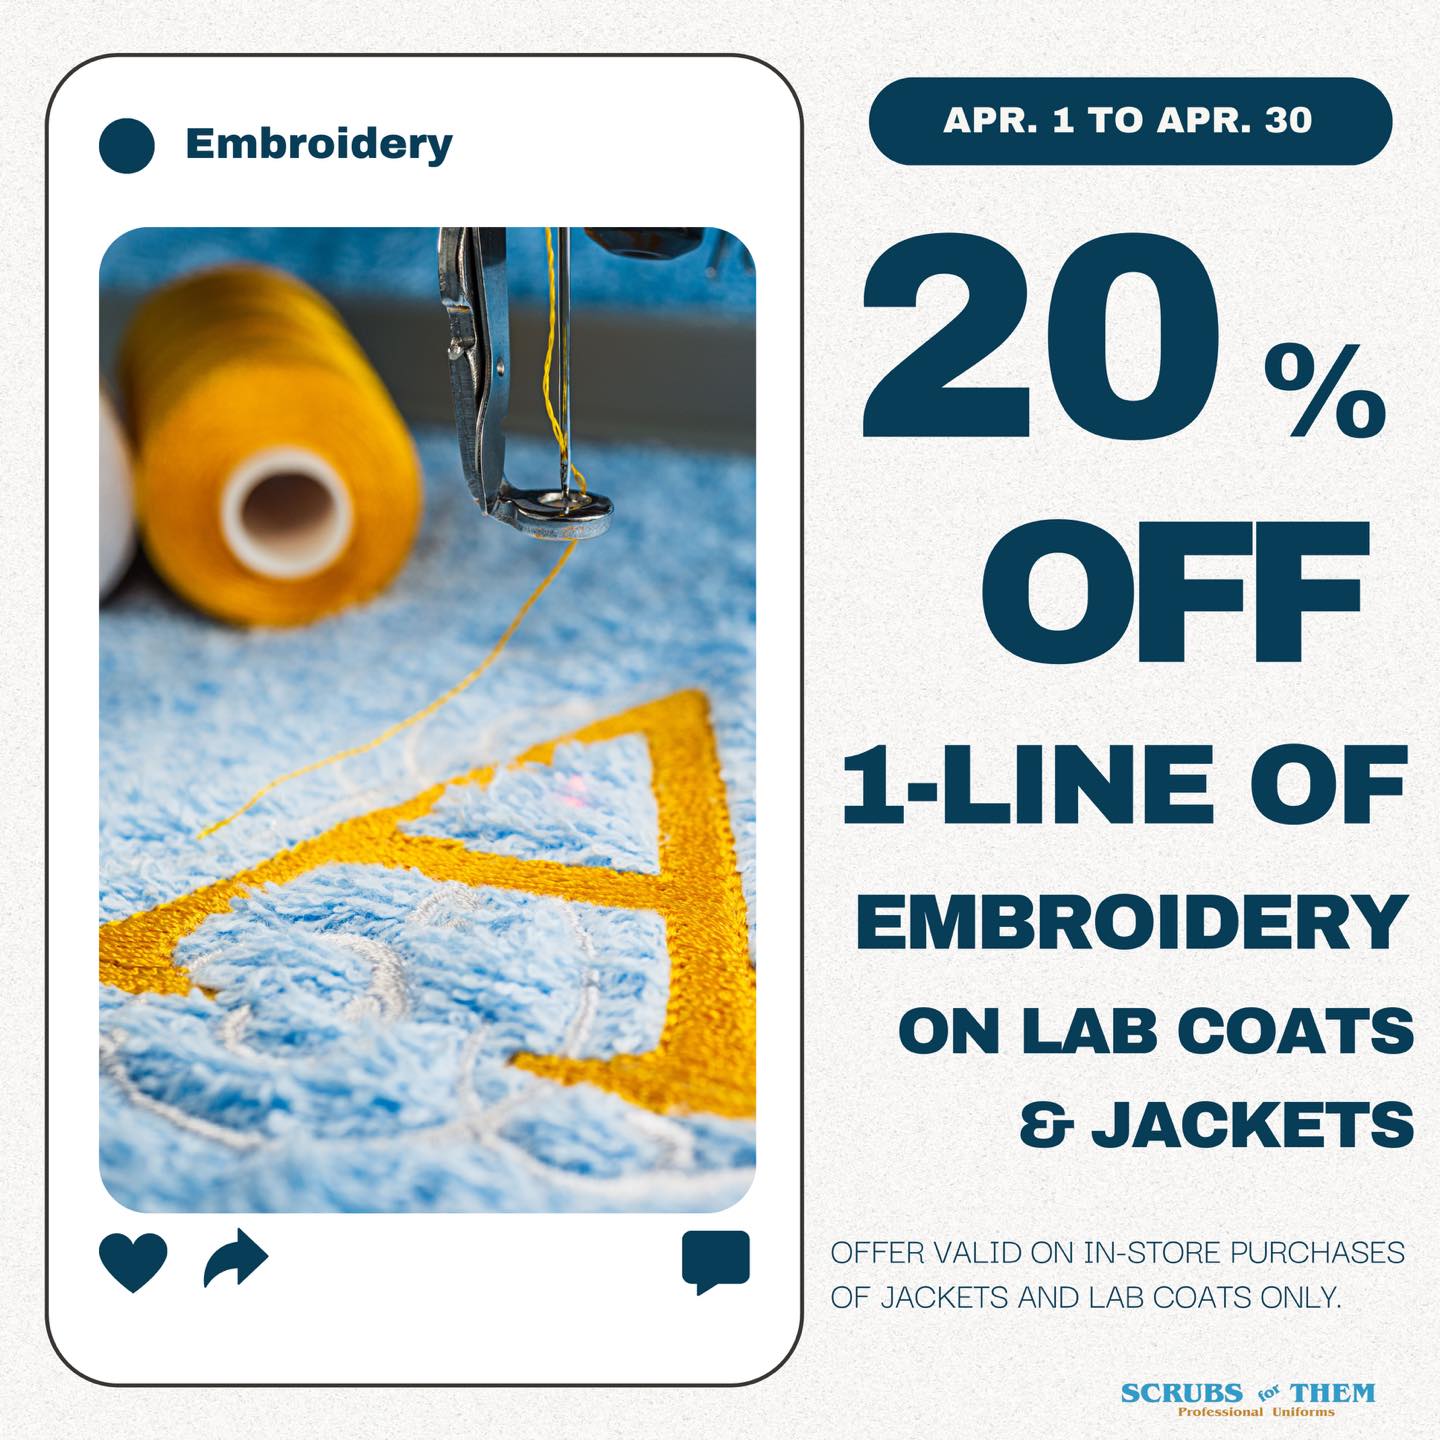 20% Off 1-Line of Embroidery on Lab Coats & Jackets